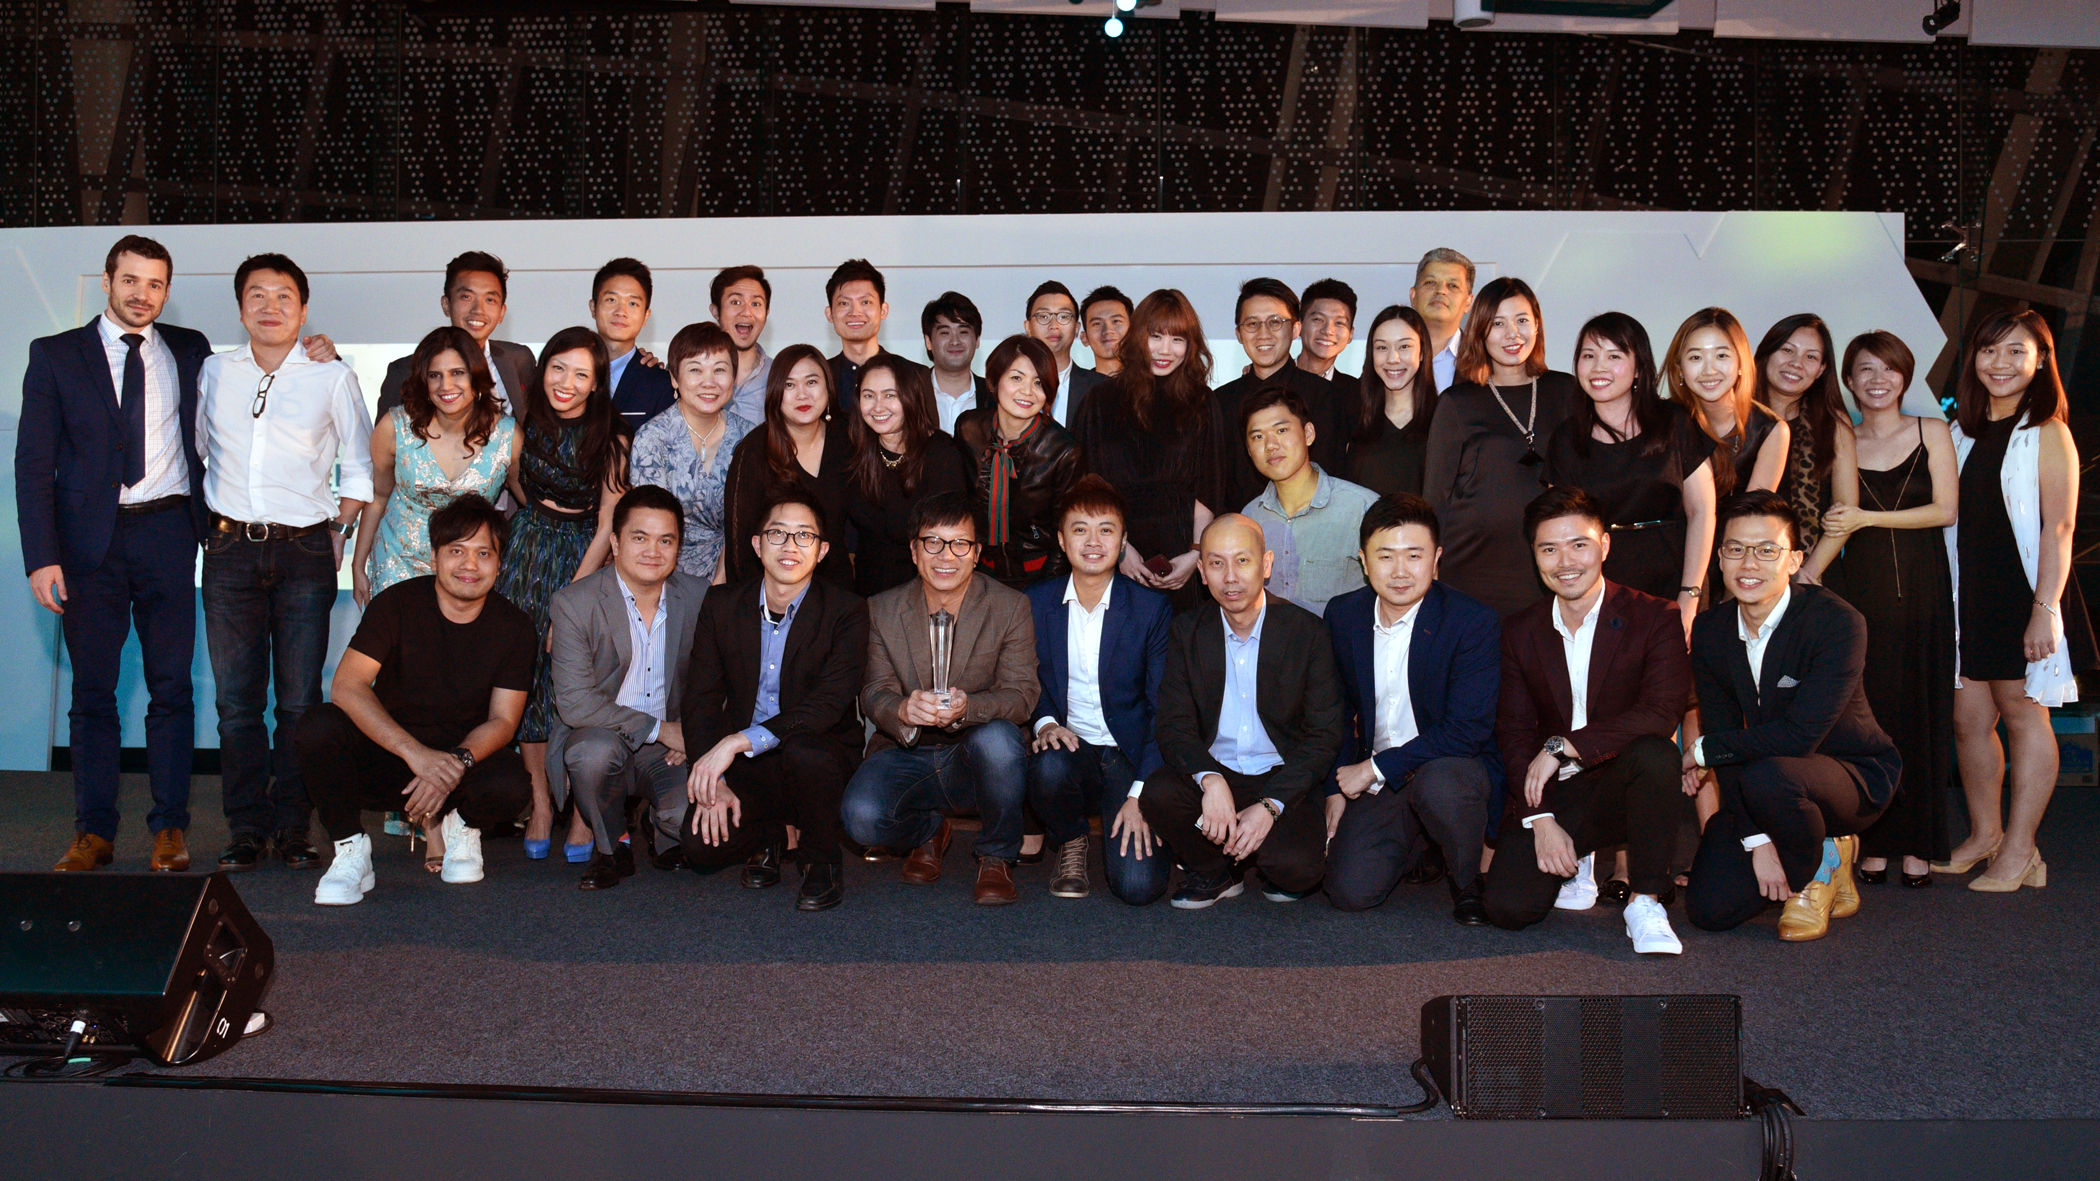 DDB tops the Hall of Fame Awards 2016 with 16 awards